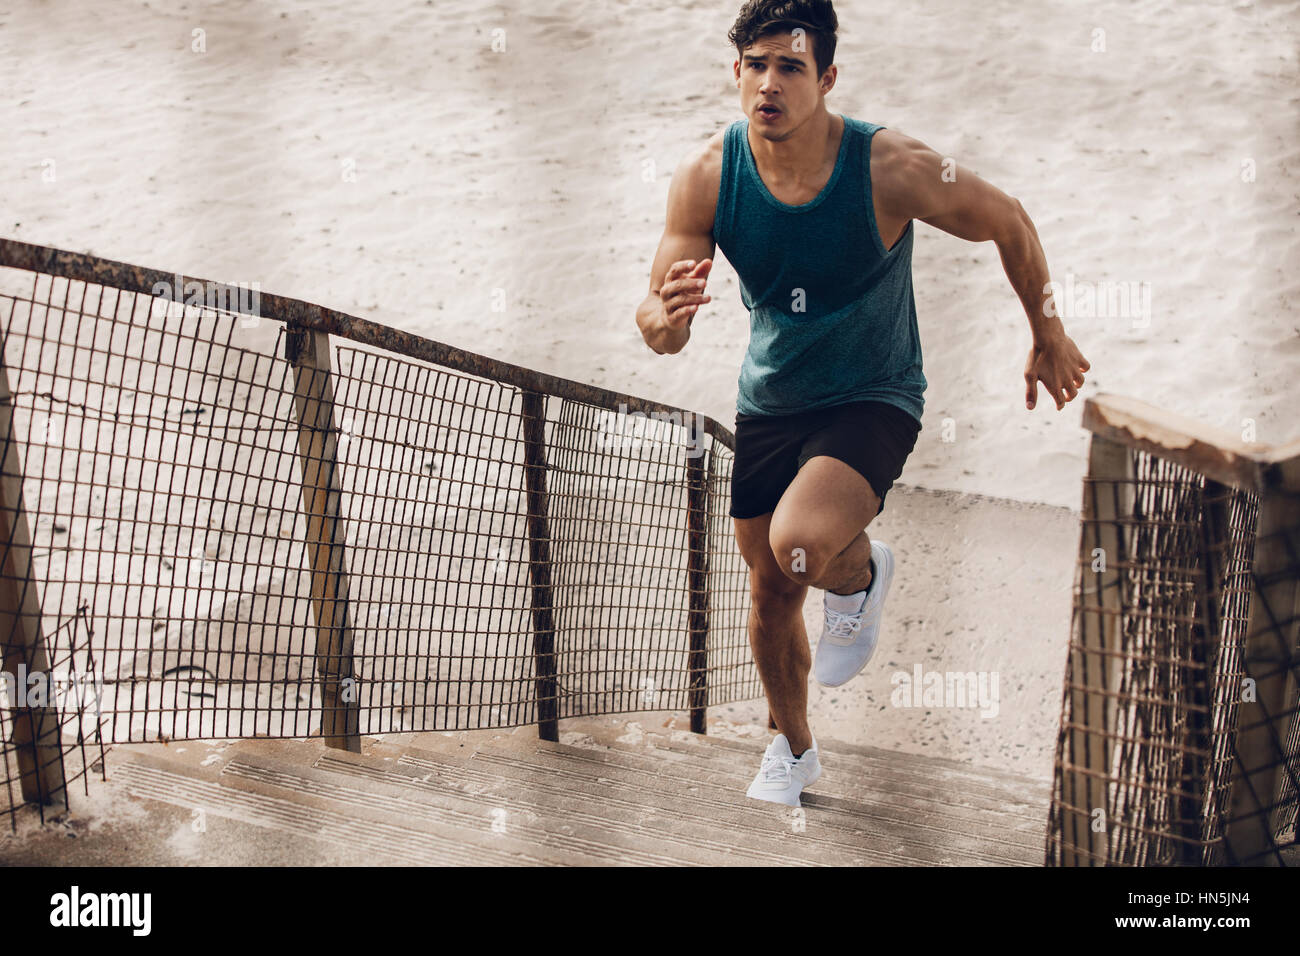 Fitness man running up the steps on beach. Muscular young male runner working out on steps on sea shore. Stock Photo